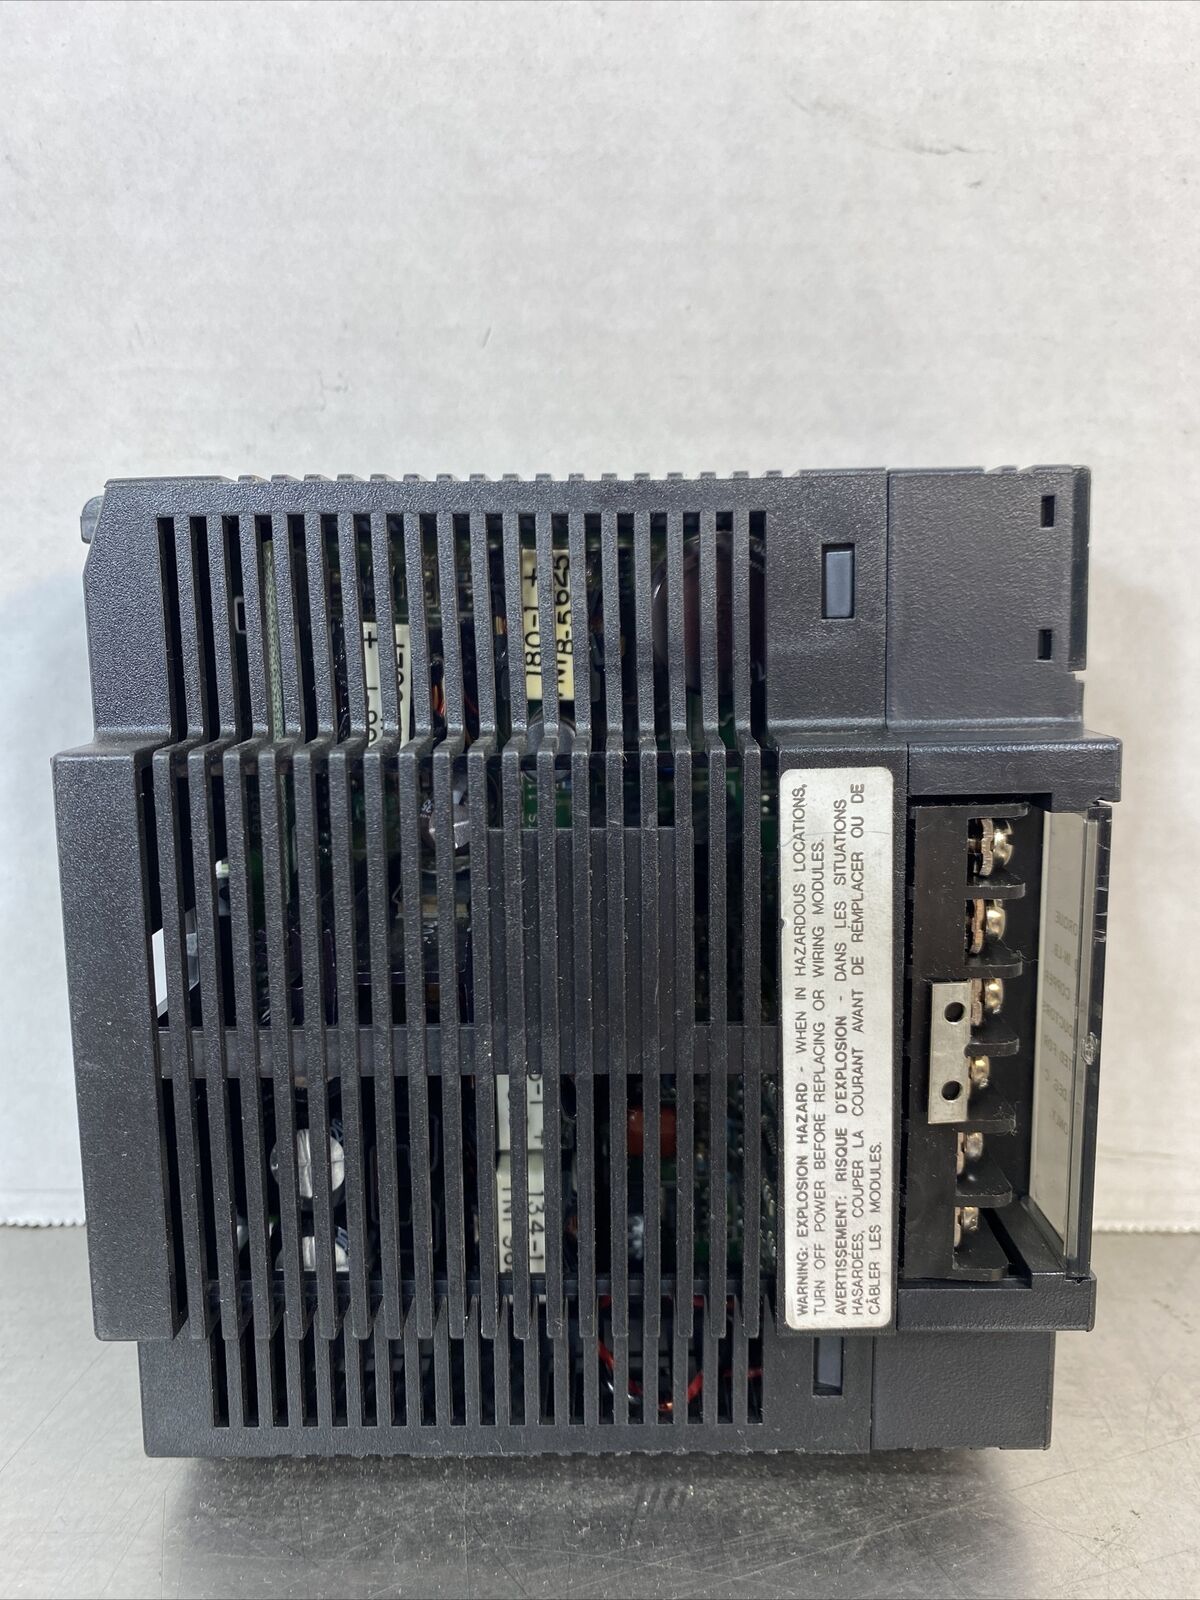 GE Fanuc Standard Power Supply Programmable Controller IC693PWR321S. 3D-23